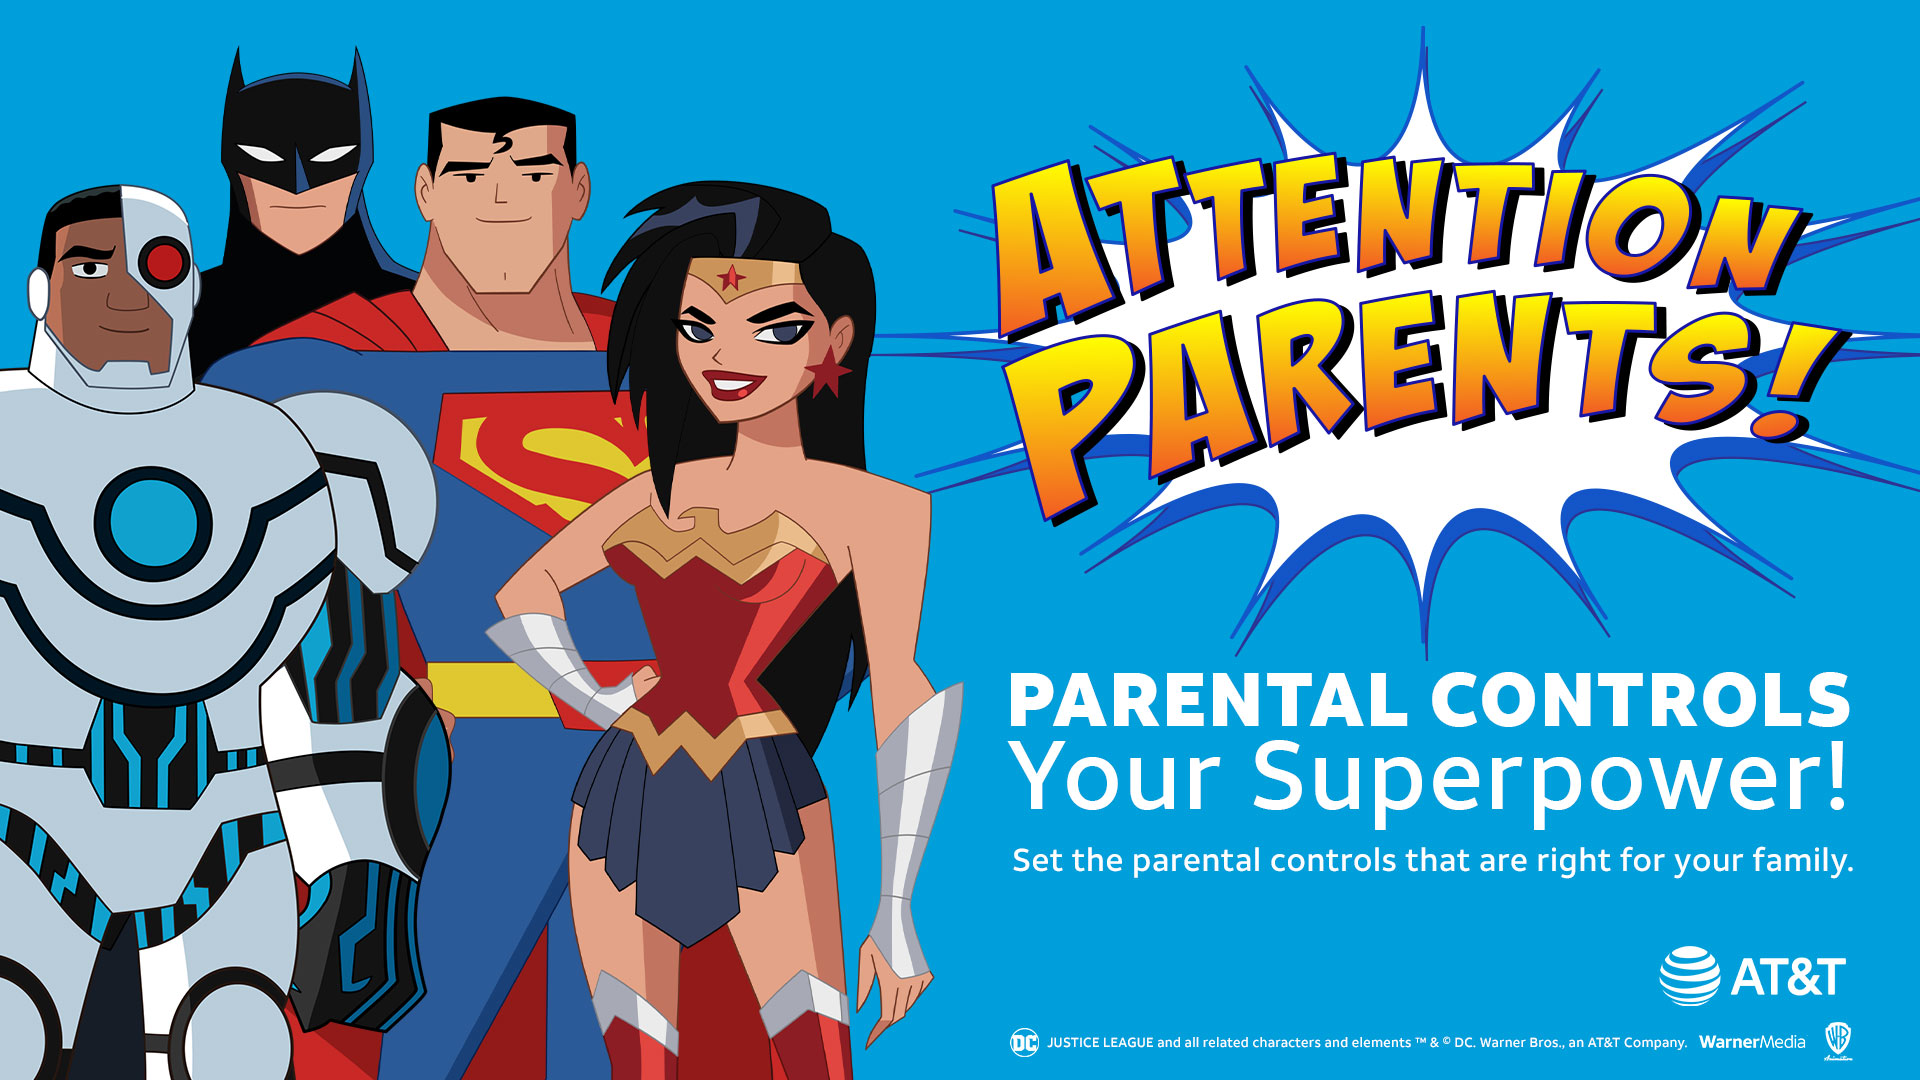 AT&T Promotes Parental Controls with DC Super Heroes